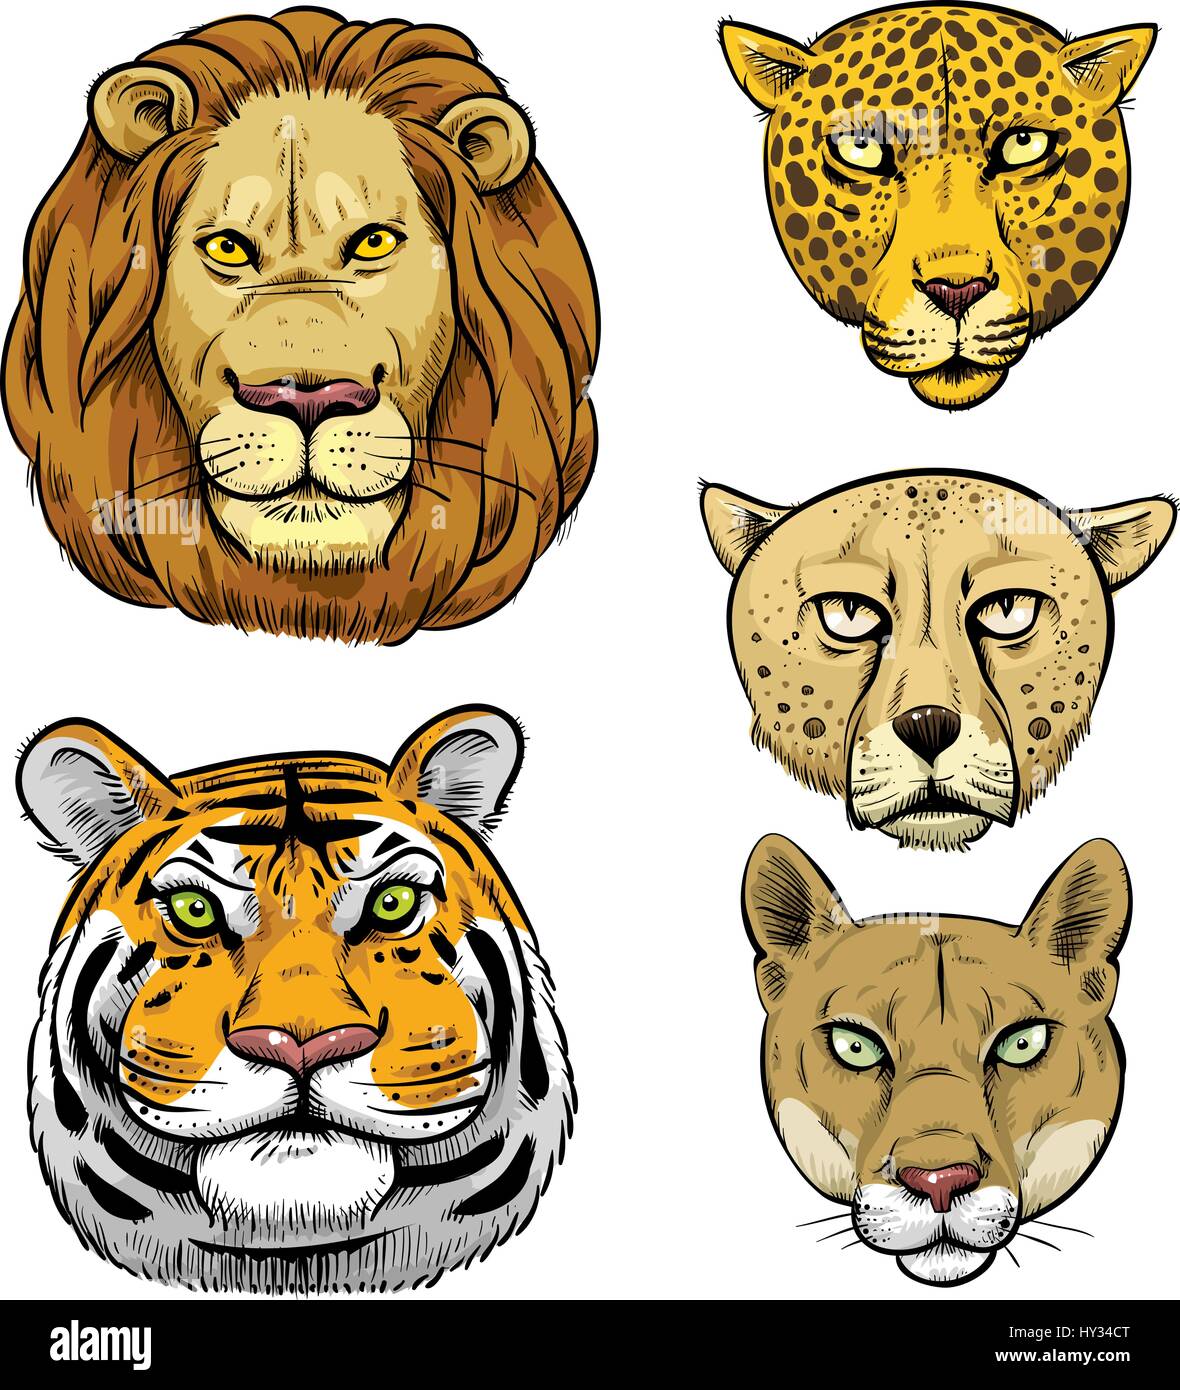 Cartoon faces of some of the largest wild cats: lion, tiger ...